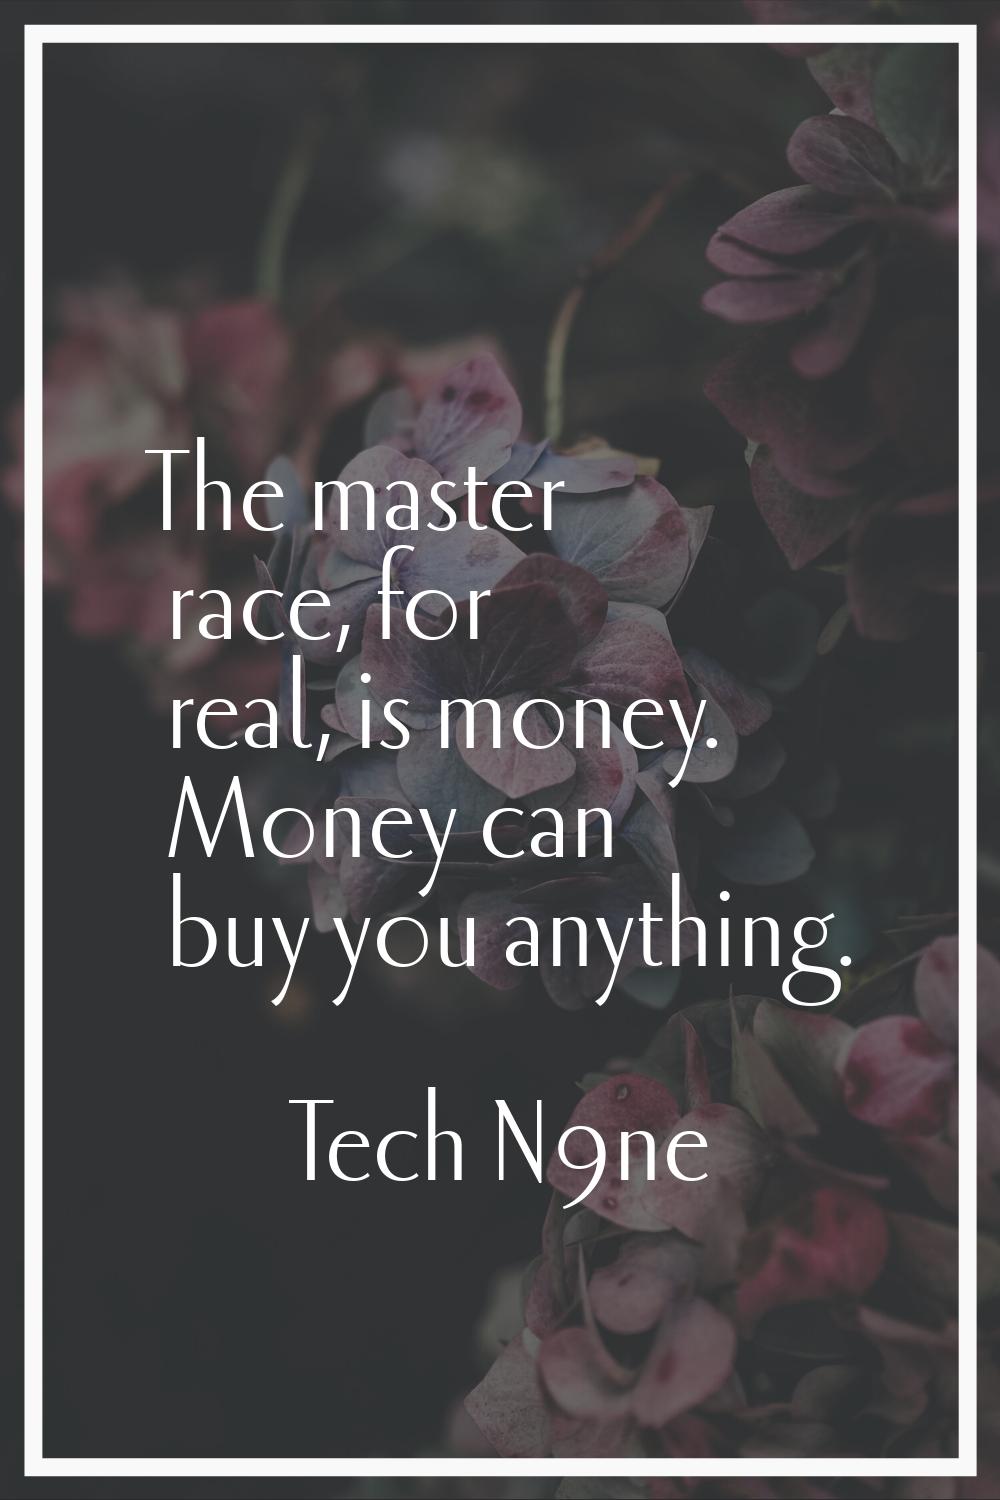 The master race, for real, is money. Money can buy you anything.